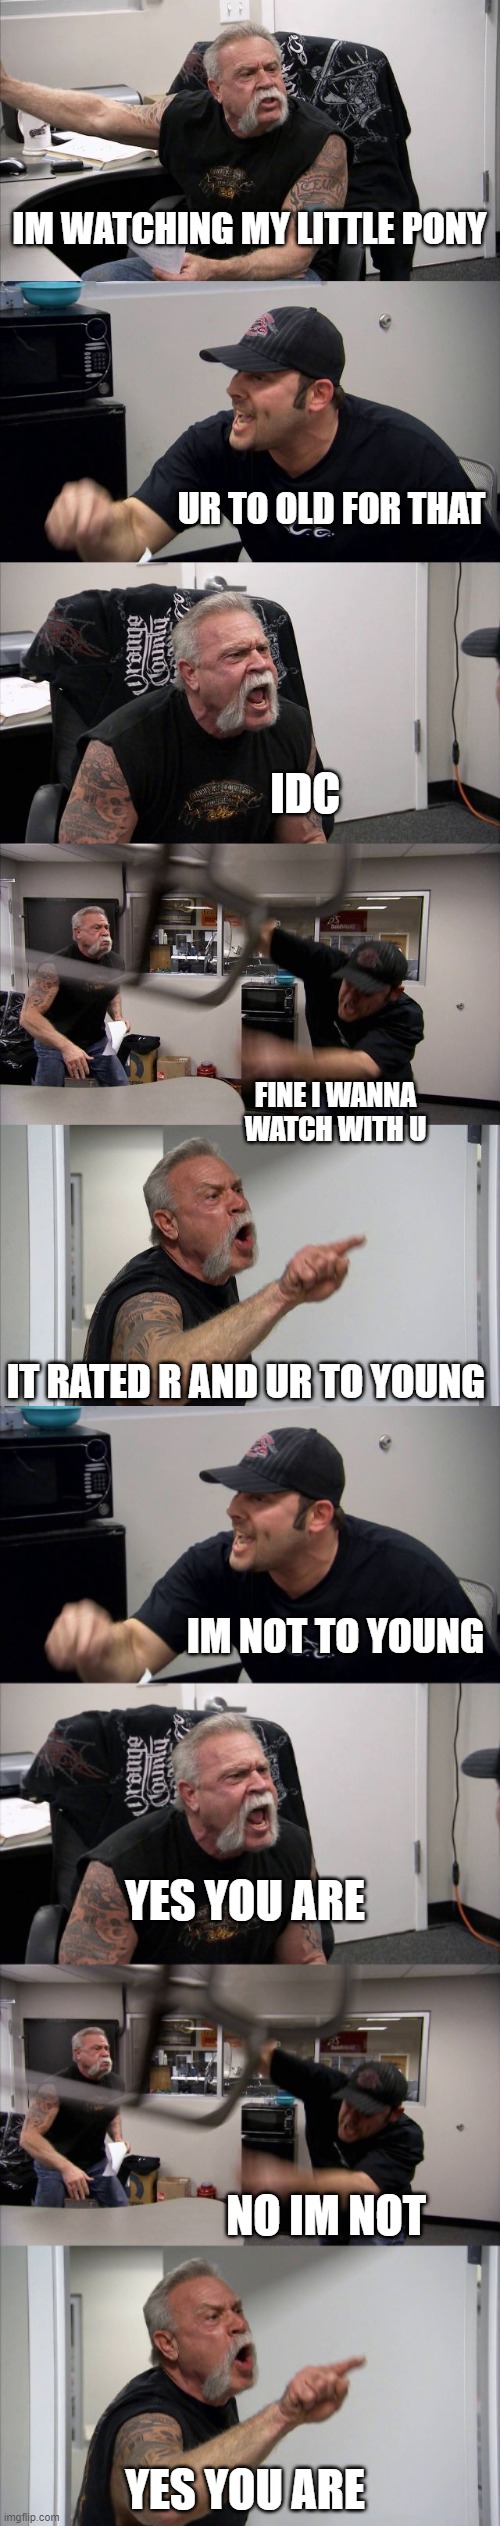 IM WATCHING MY LITTLE PONY; UR TO OLD FOR THAT; IDC; FINE I WANNA WATCH WITH U; IT RATED R AND UR TO YOUNG; IM NOT TO YOUNG; YES YOU ARE; NO IM NOT; YES YOU ARE | image tagged in memes,american chopper argument,my little pony,young,idc | made w/ Imgflip meme maker